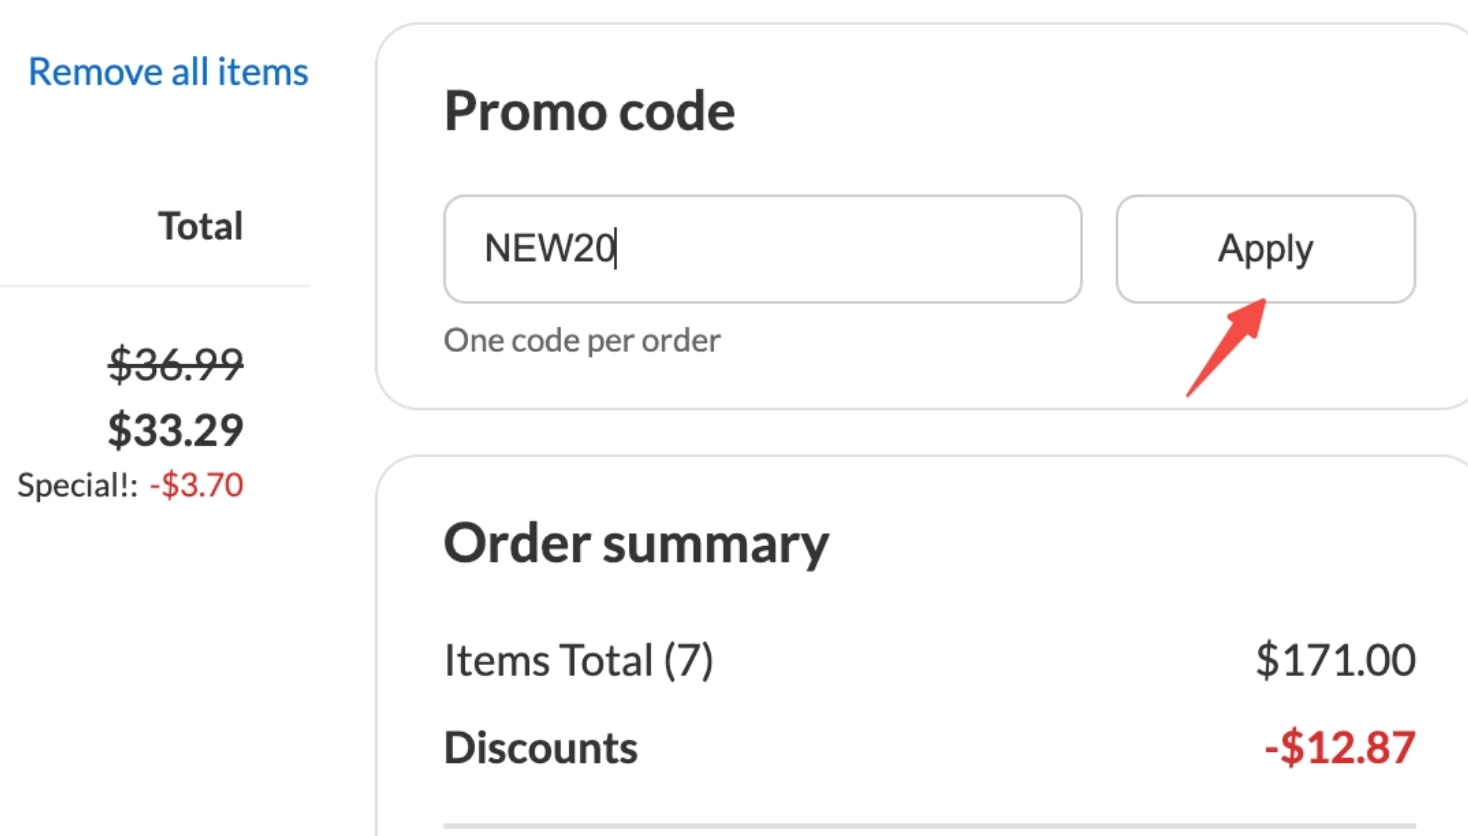 Step 3: When checking out at river.com, paste the discount code into the specified promotional code box.